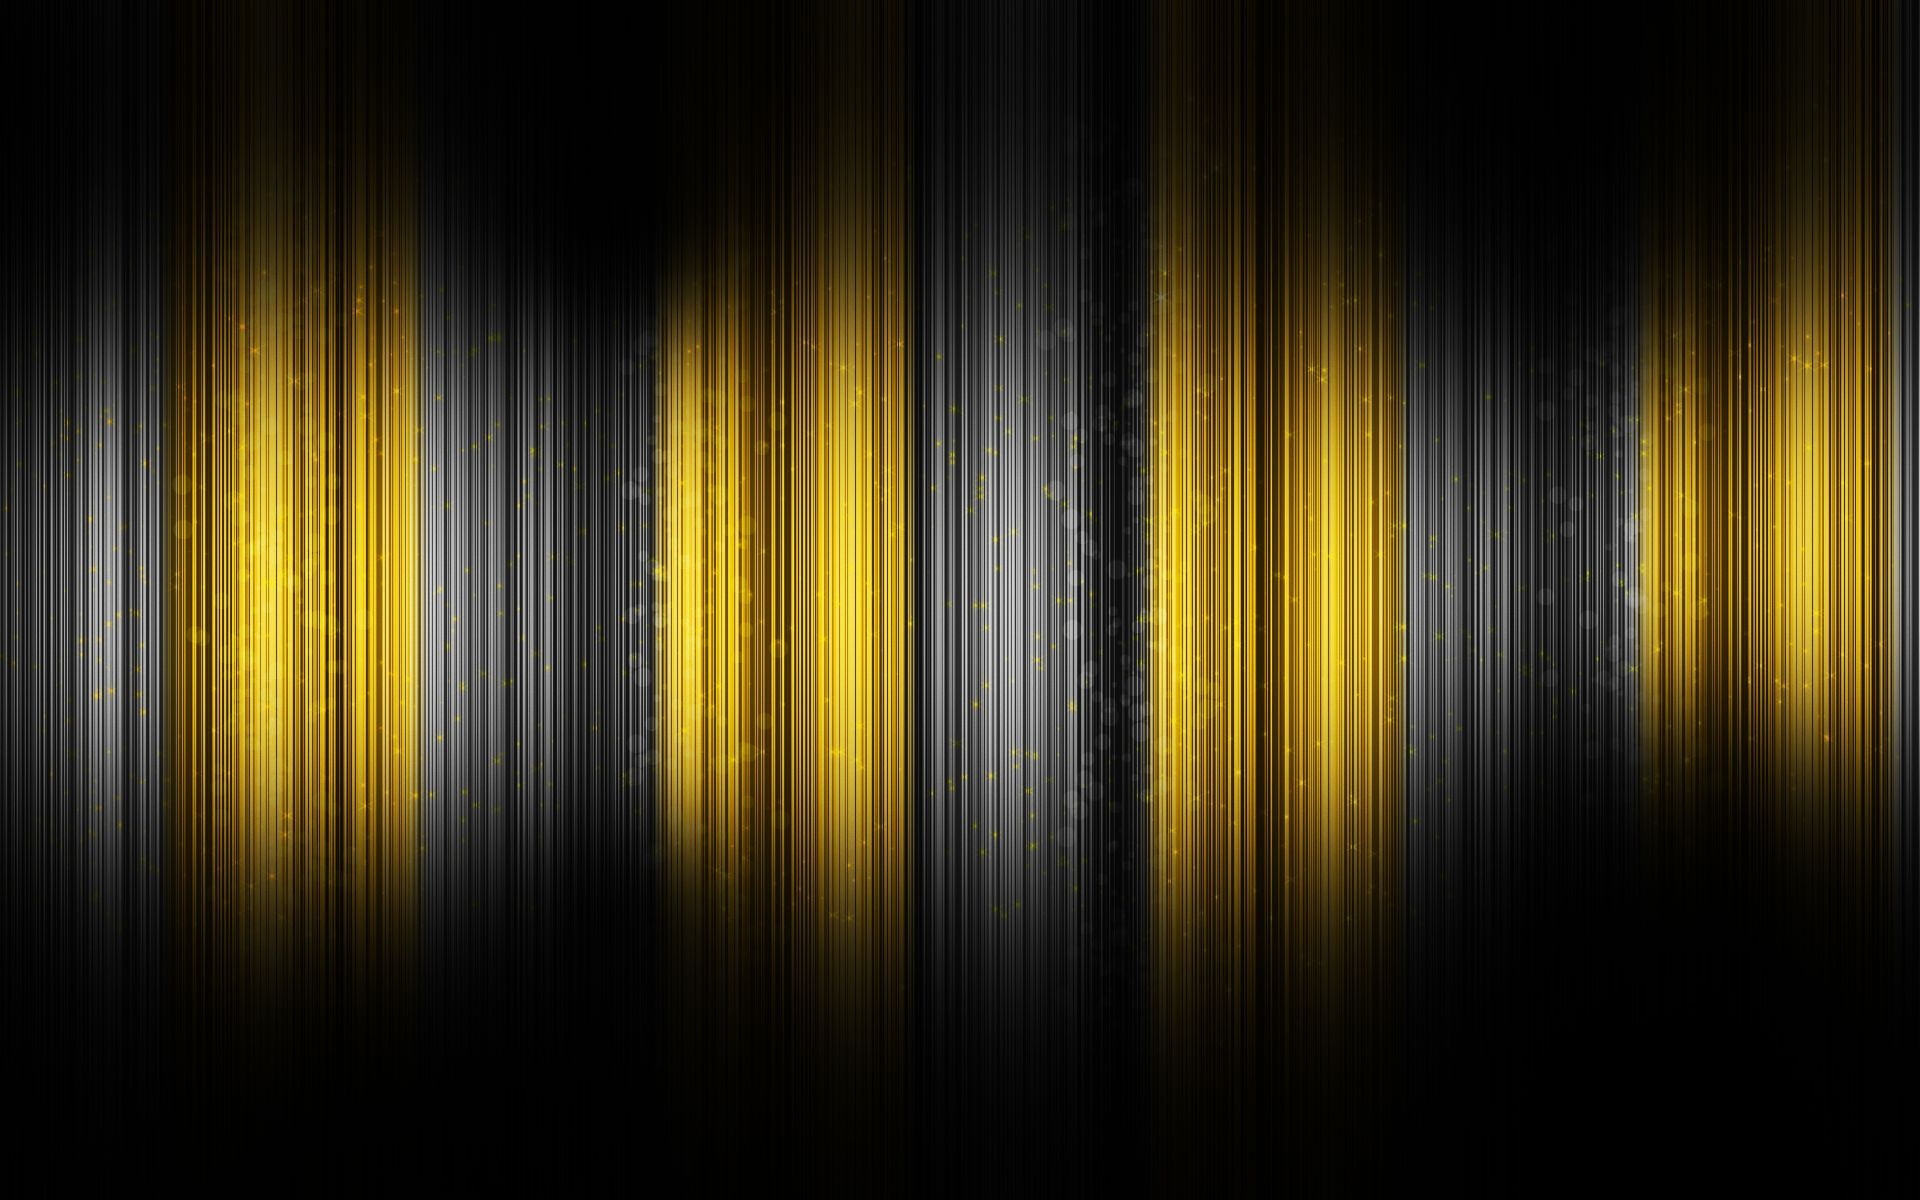 Abstract HD Wallpaper 1080P HD 1080P 12. Black background wallpaper, Gold abstract wallpaper, Black abstract background